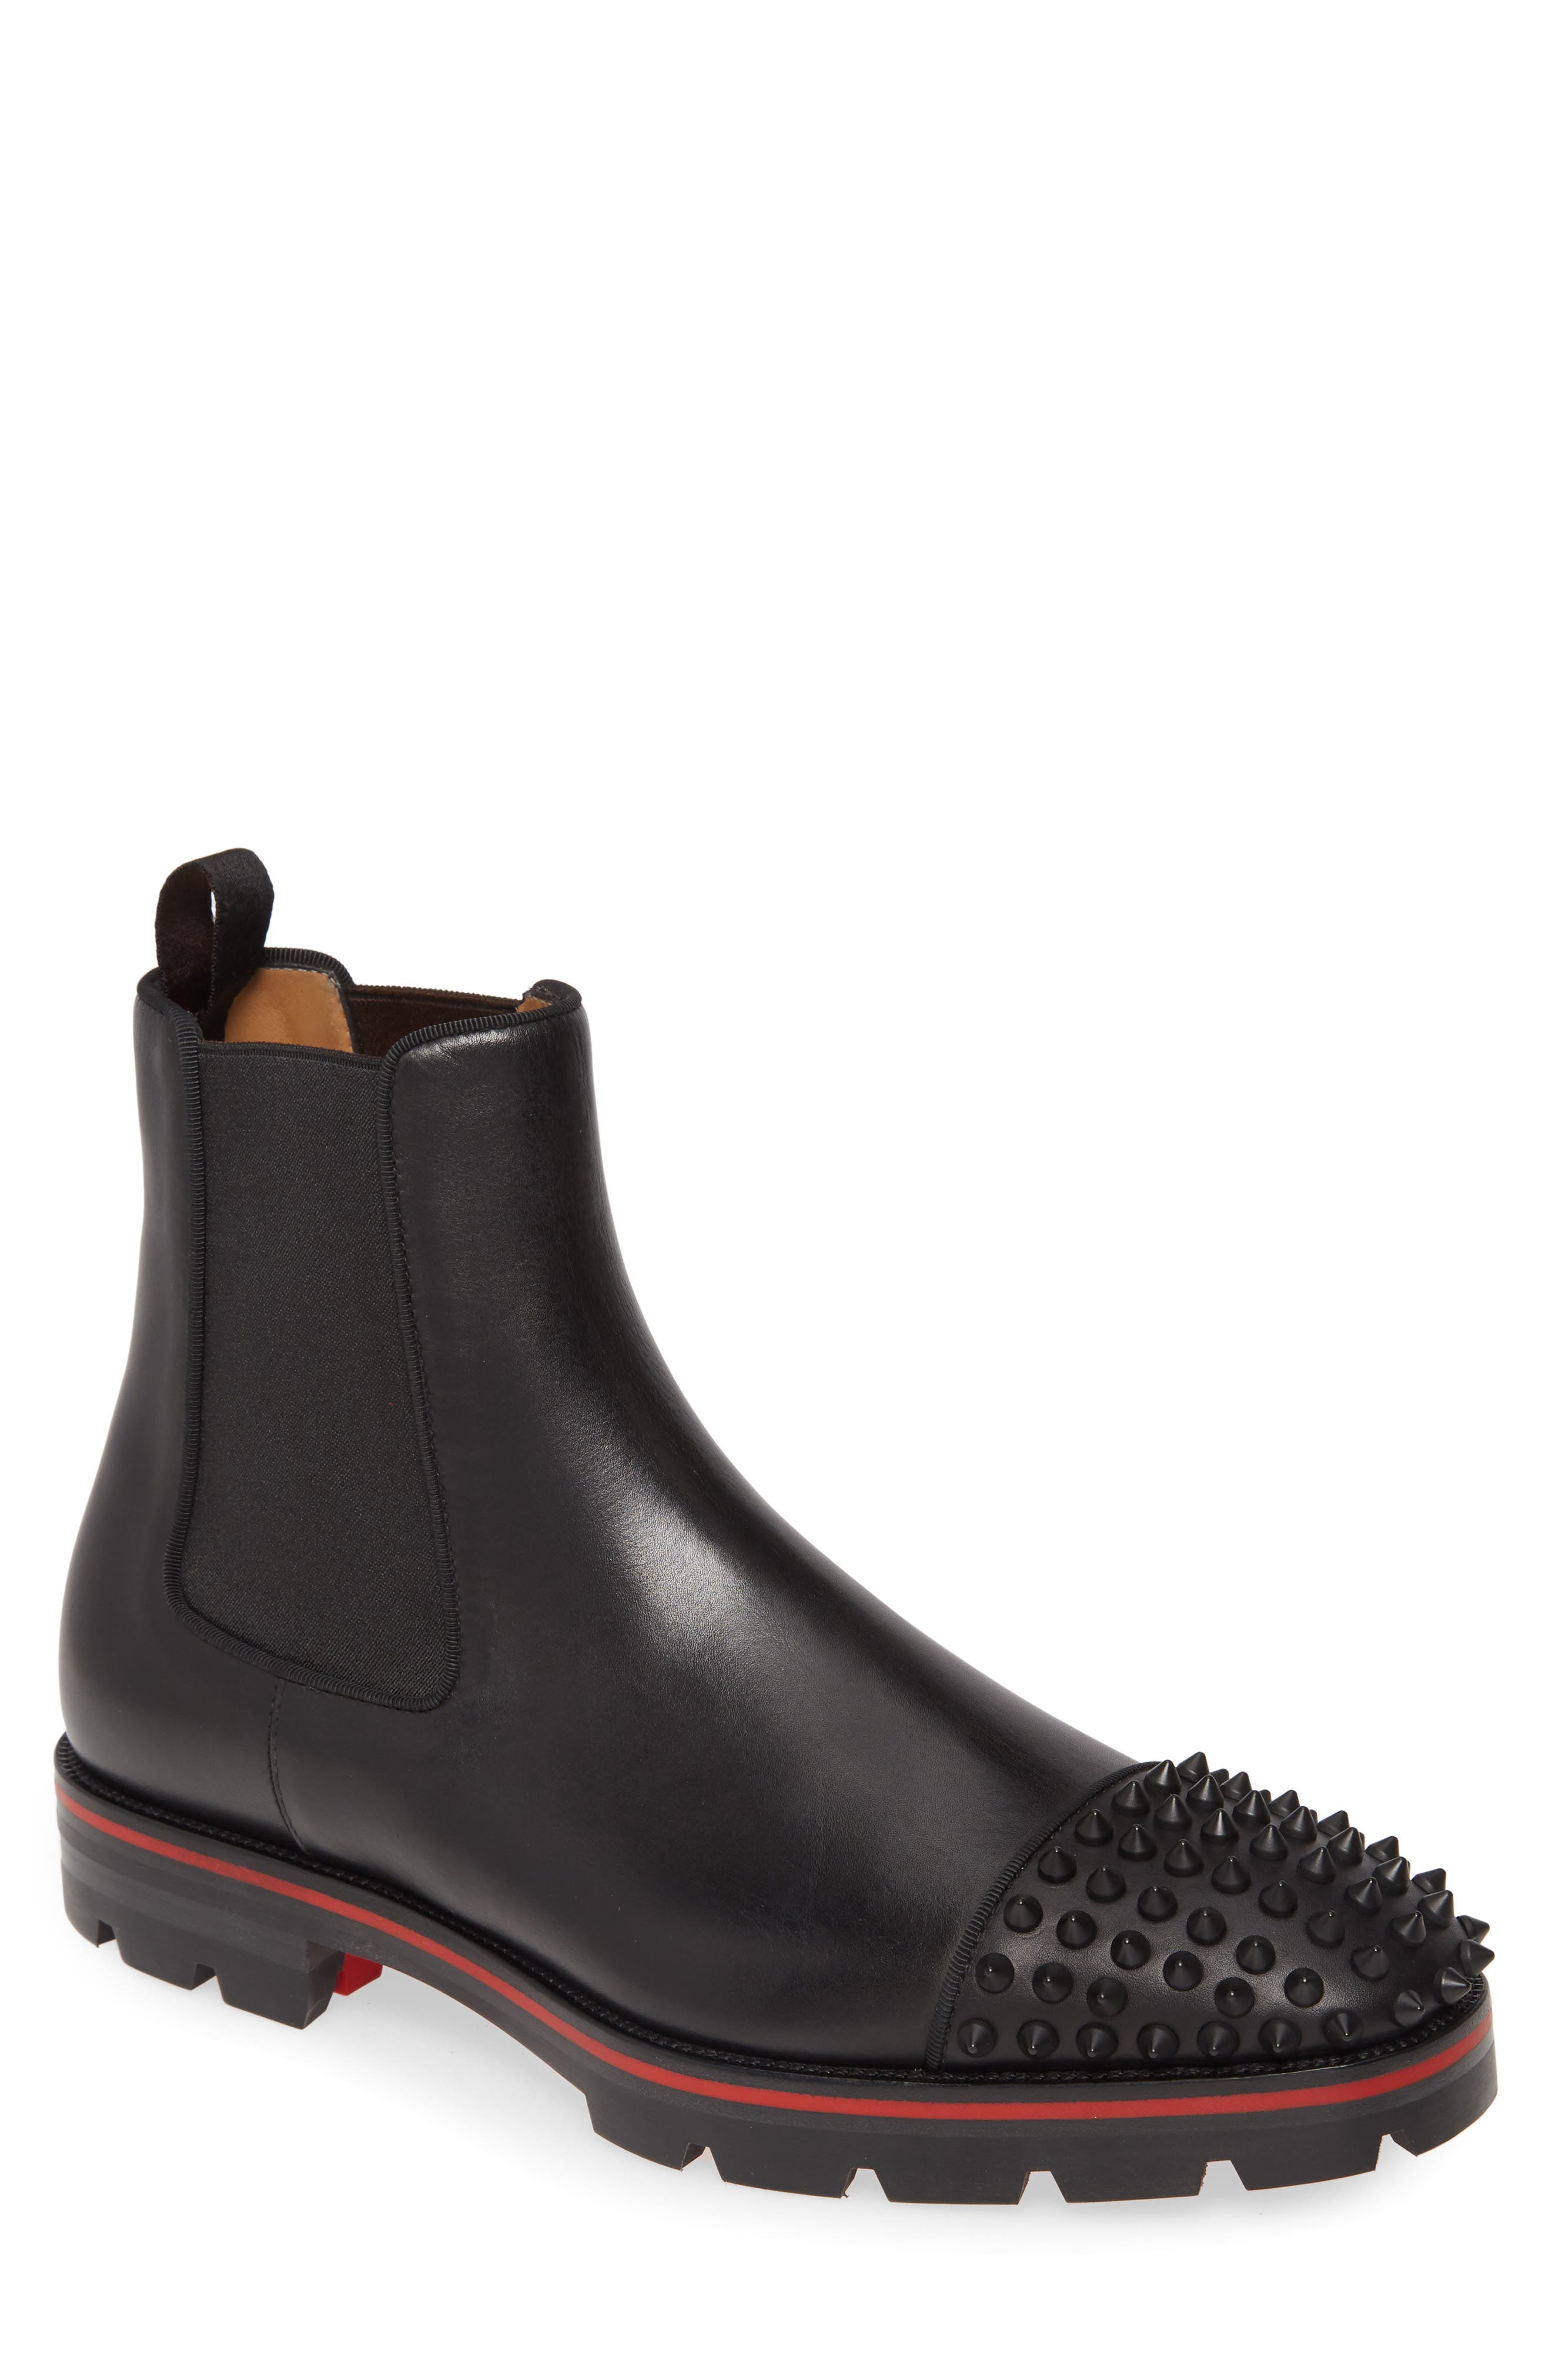 h and m chelsea boots mens